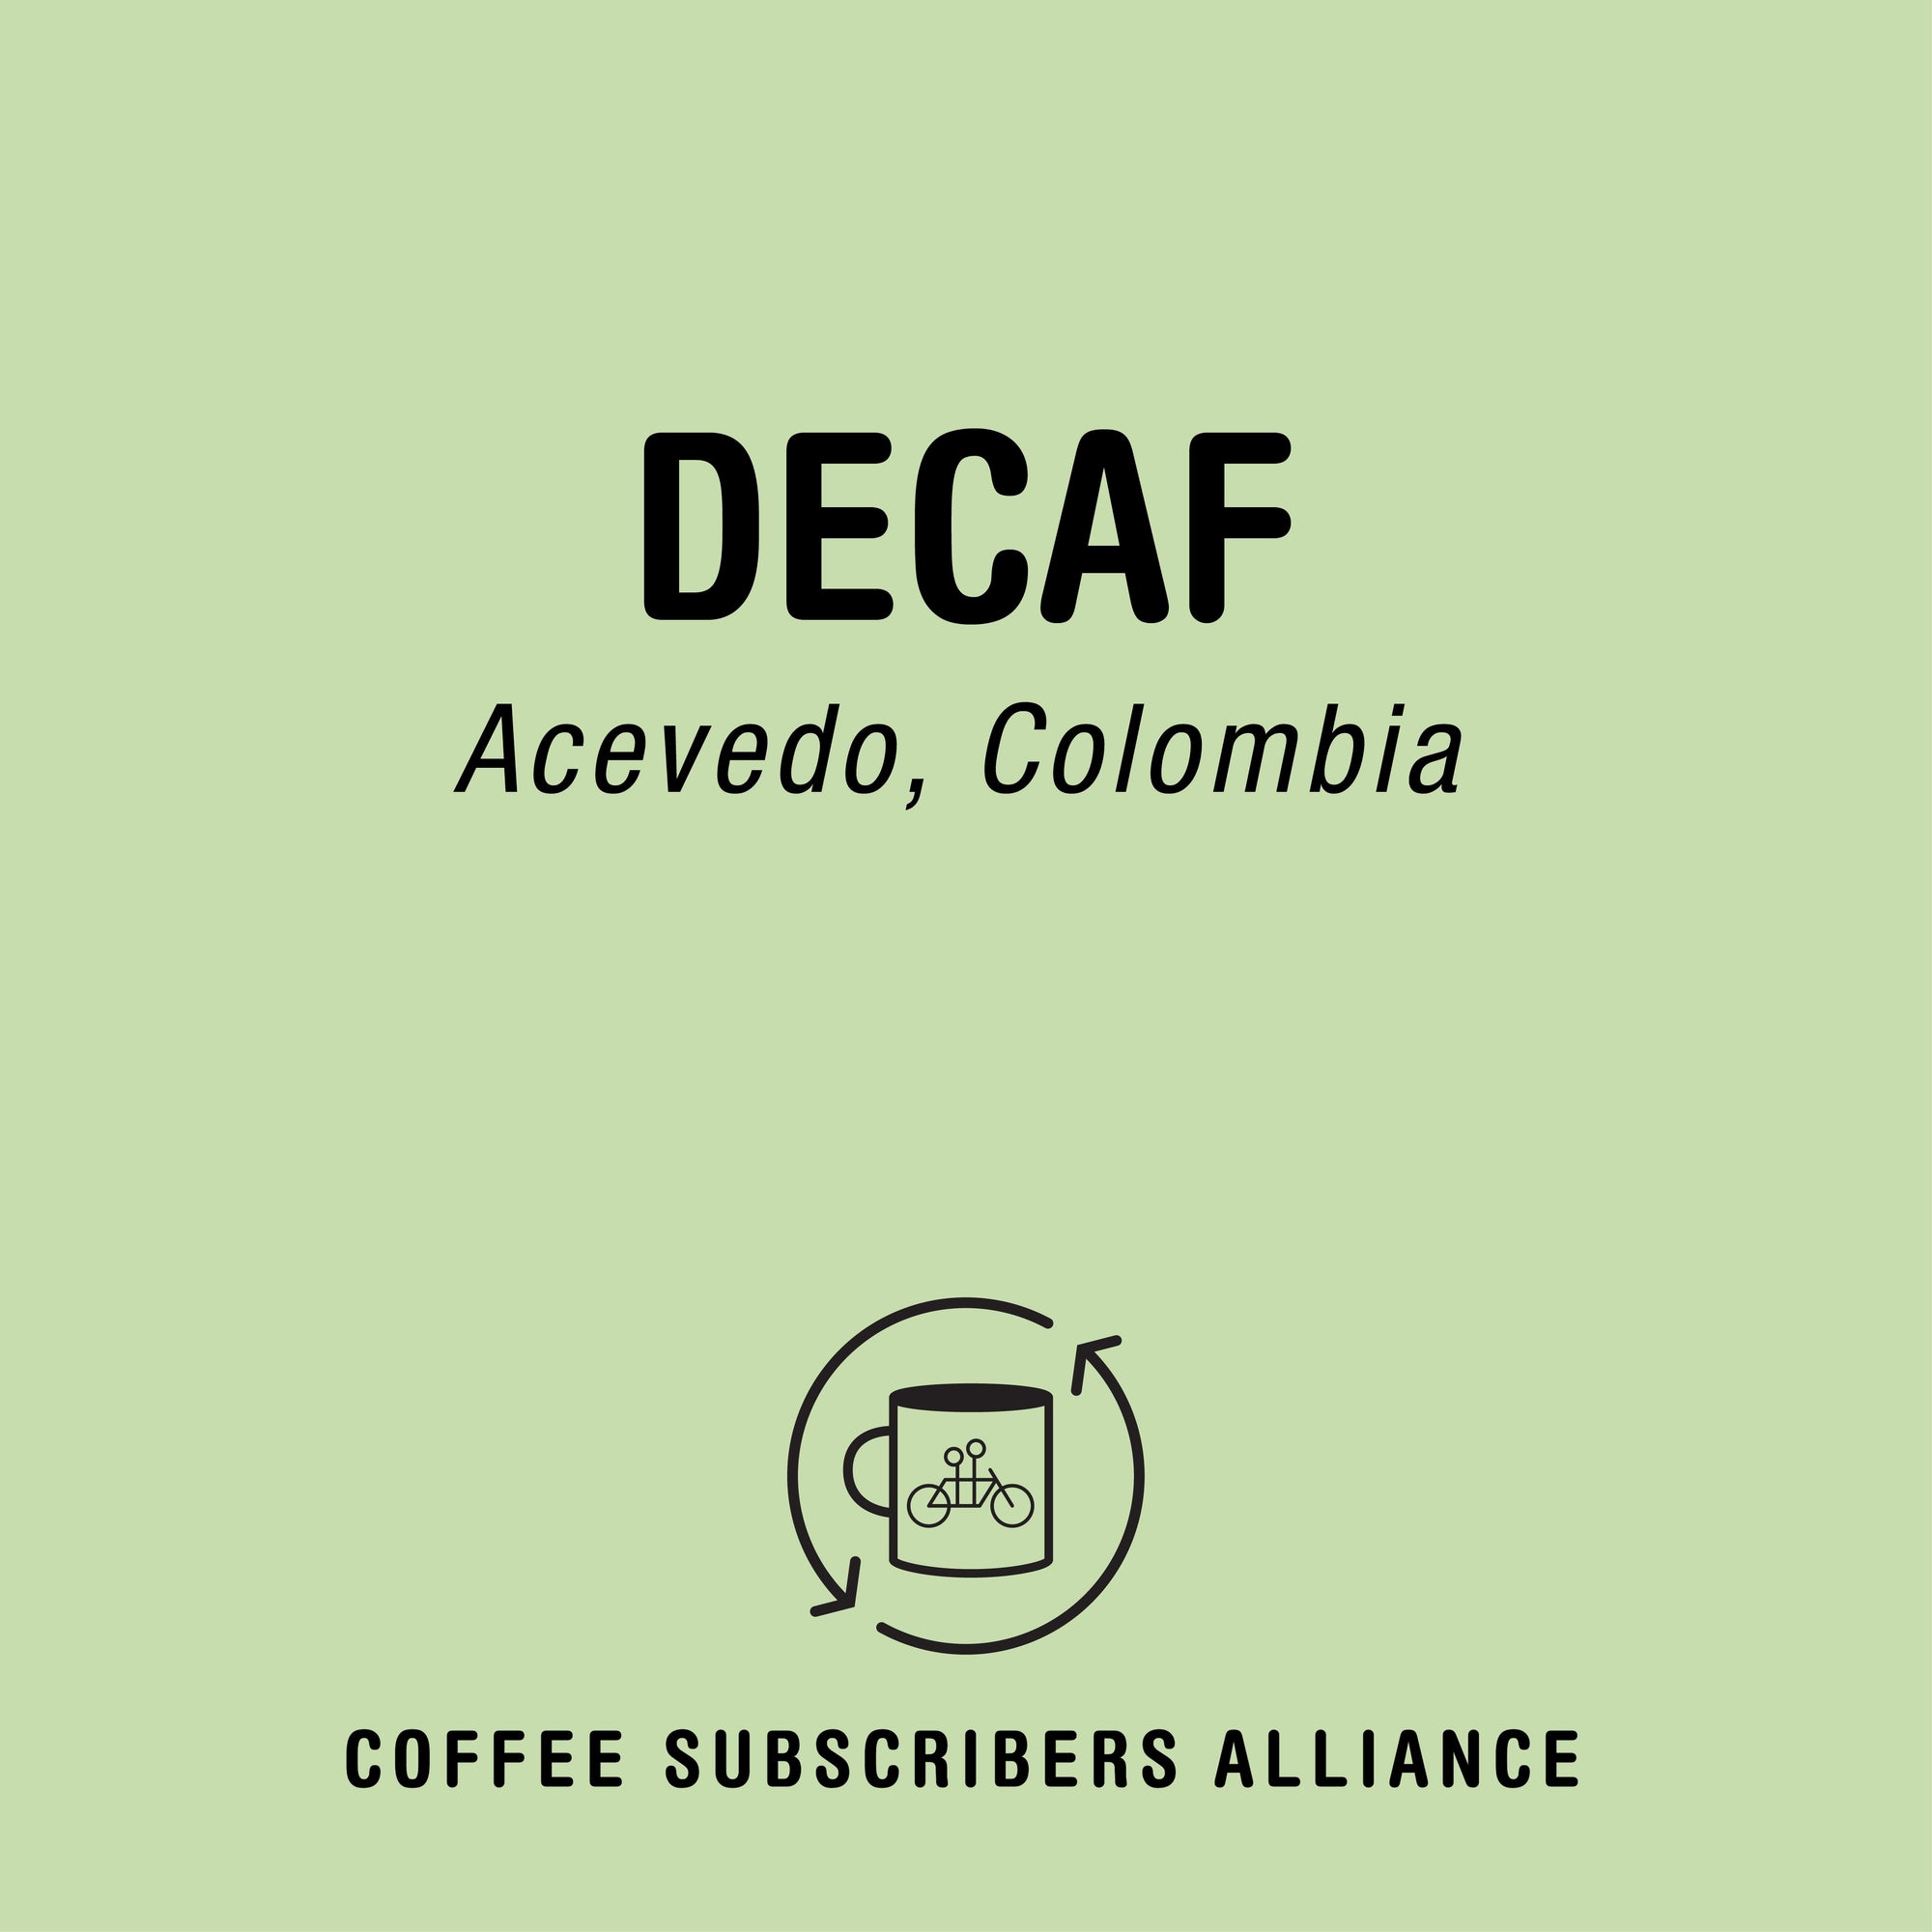 Label design for "Decaf Subscription Gift - 1 Week x 6" coffee from Acevedo, Colombia by Tandem, featuring a minimalistic style with black text on a green background and a small coffee cup